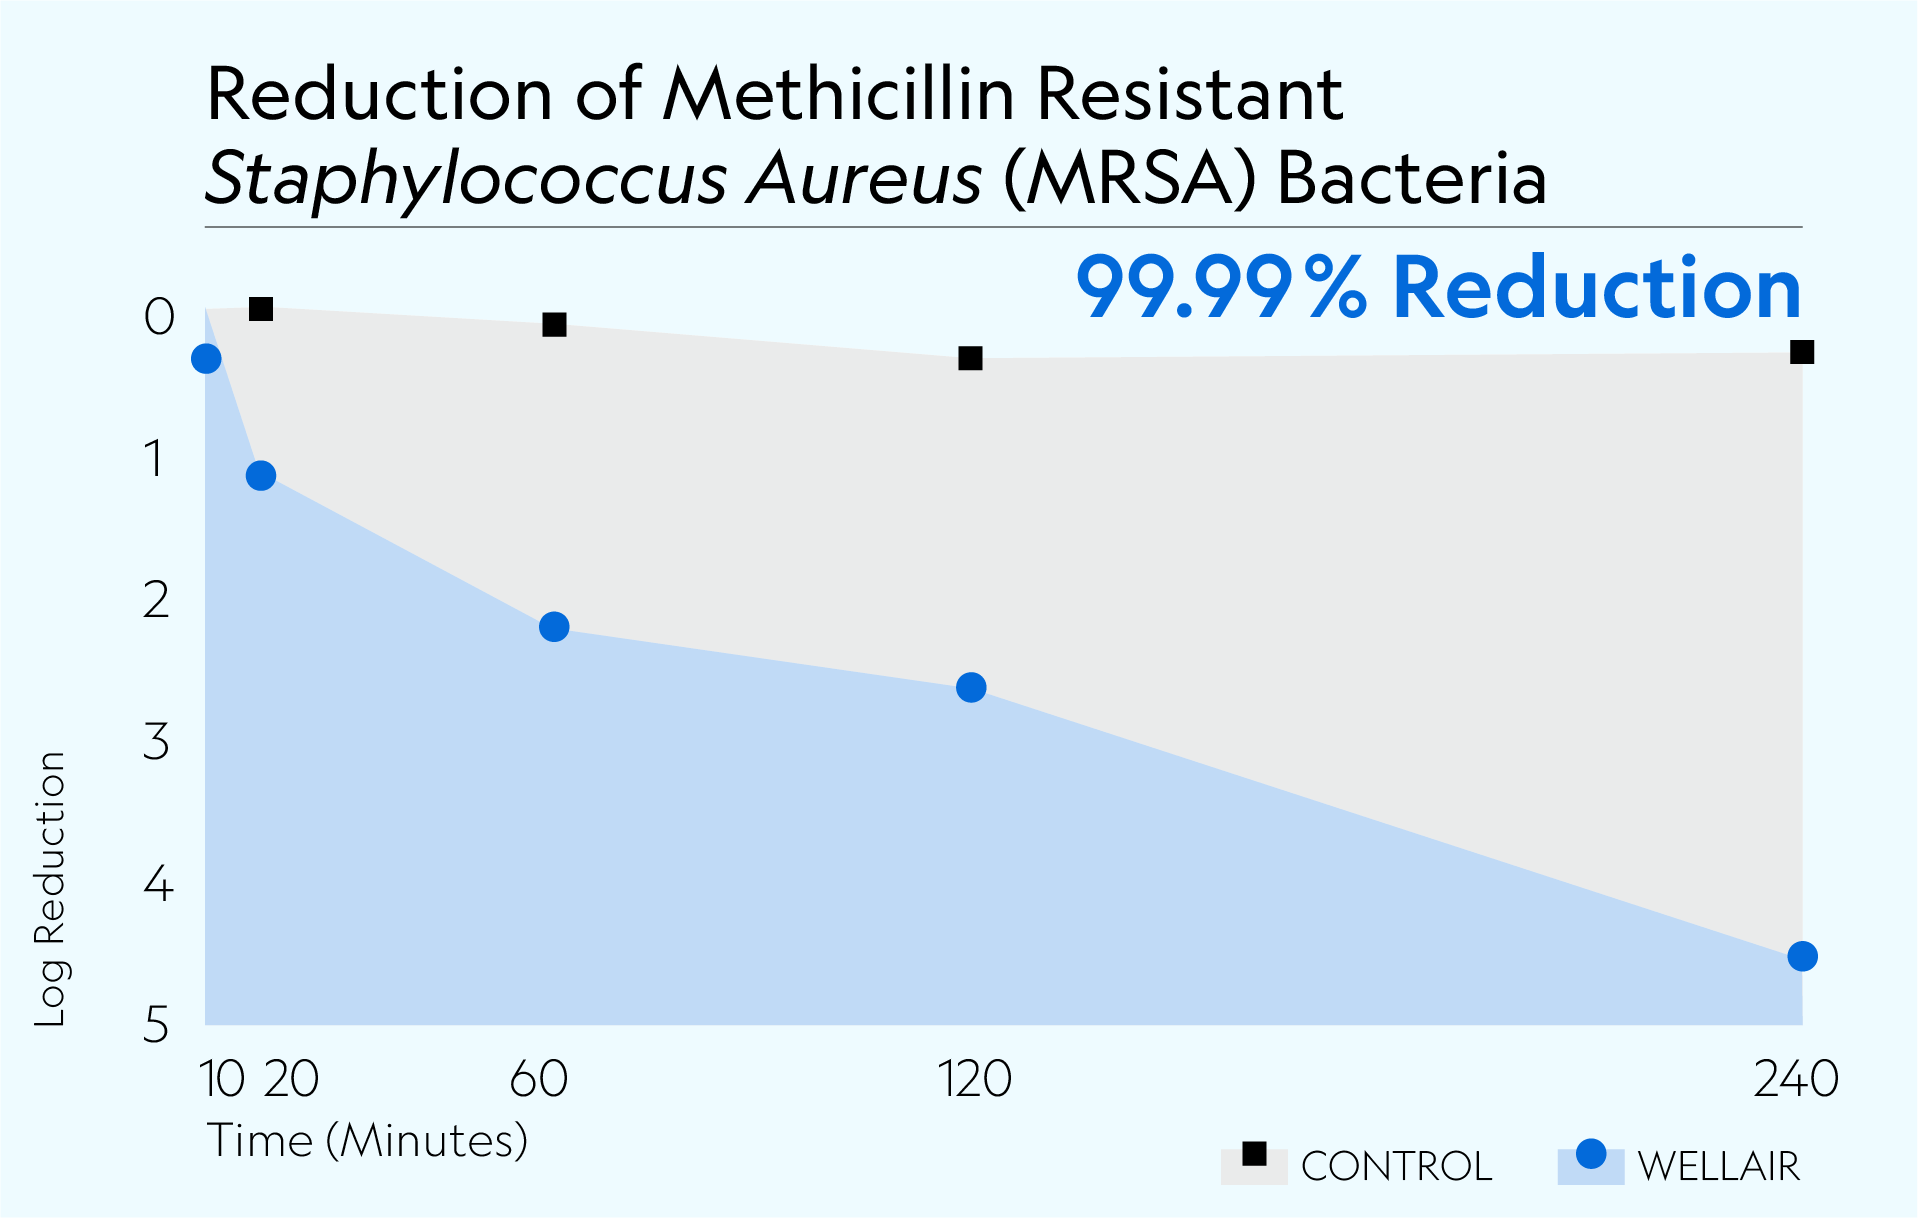 Protect 900 achieved 99.99% reduction of MRSA